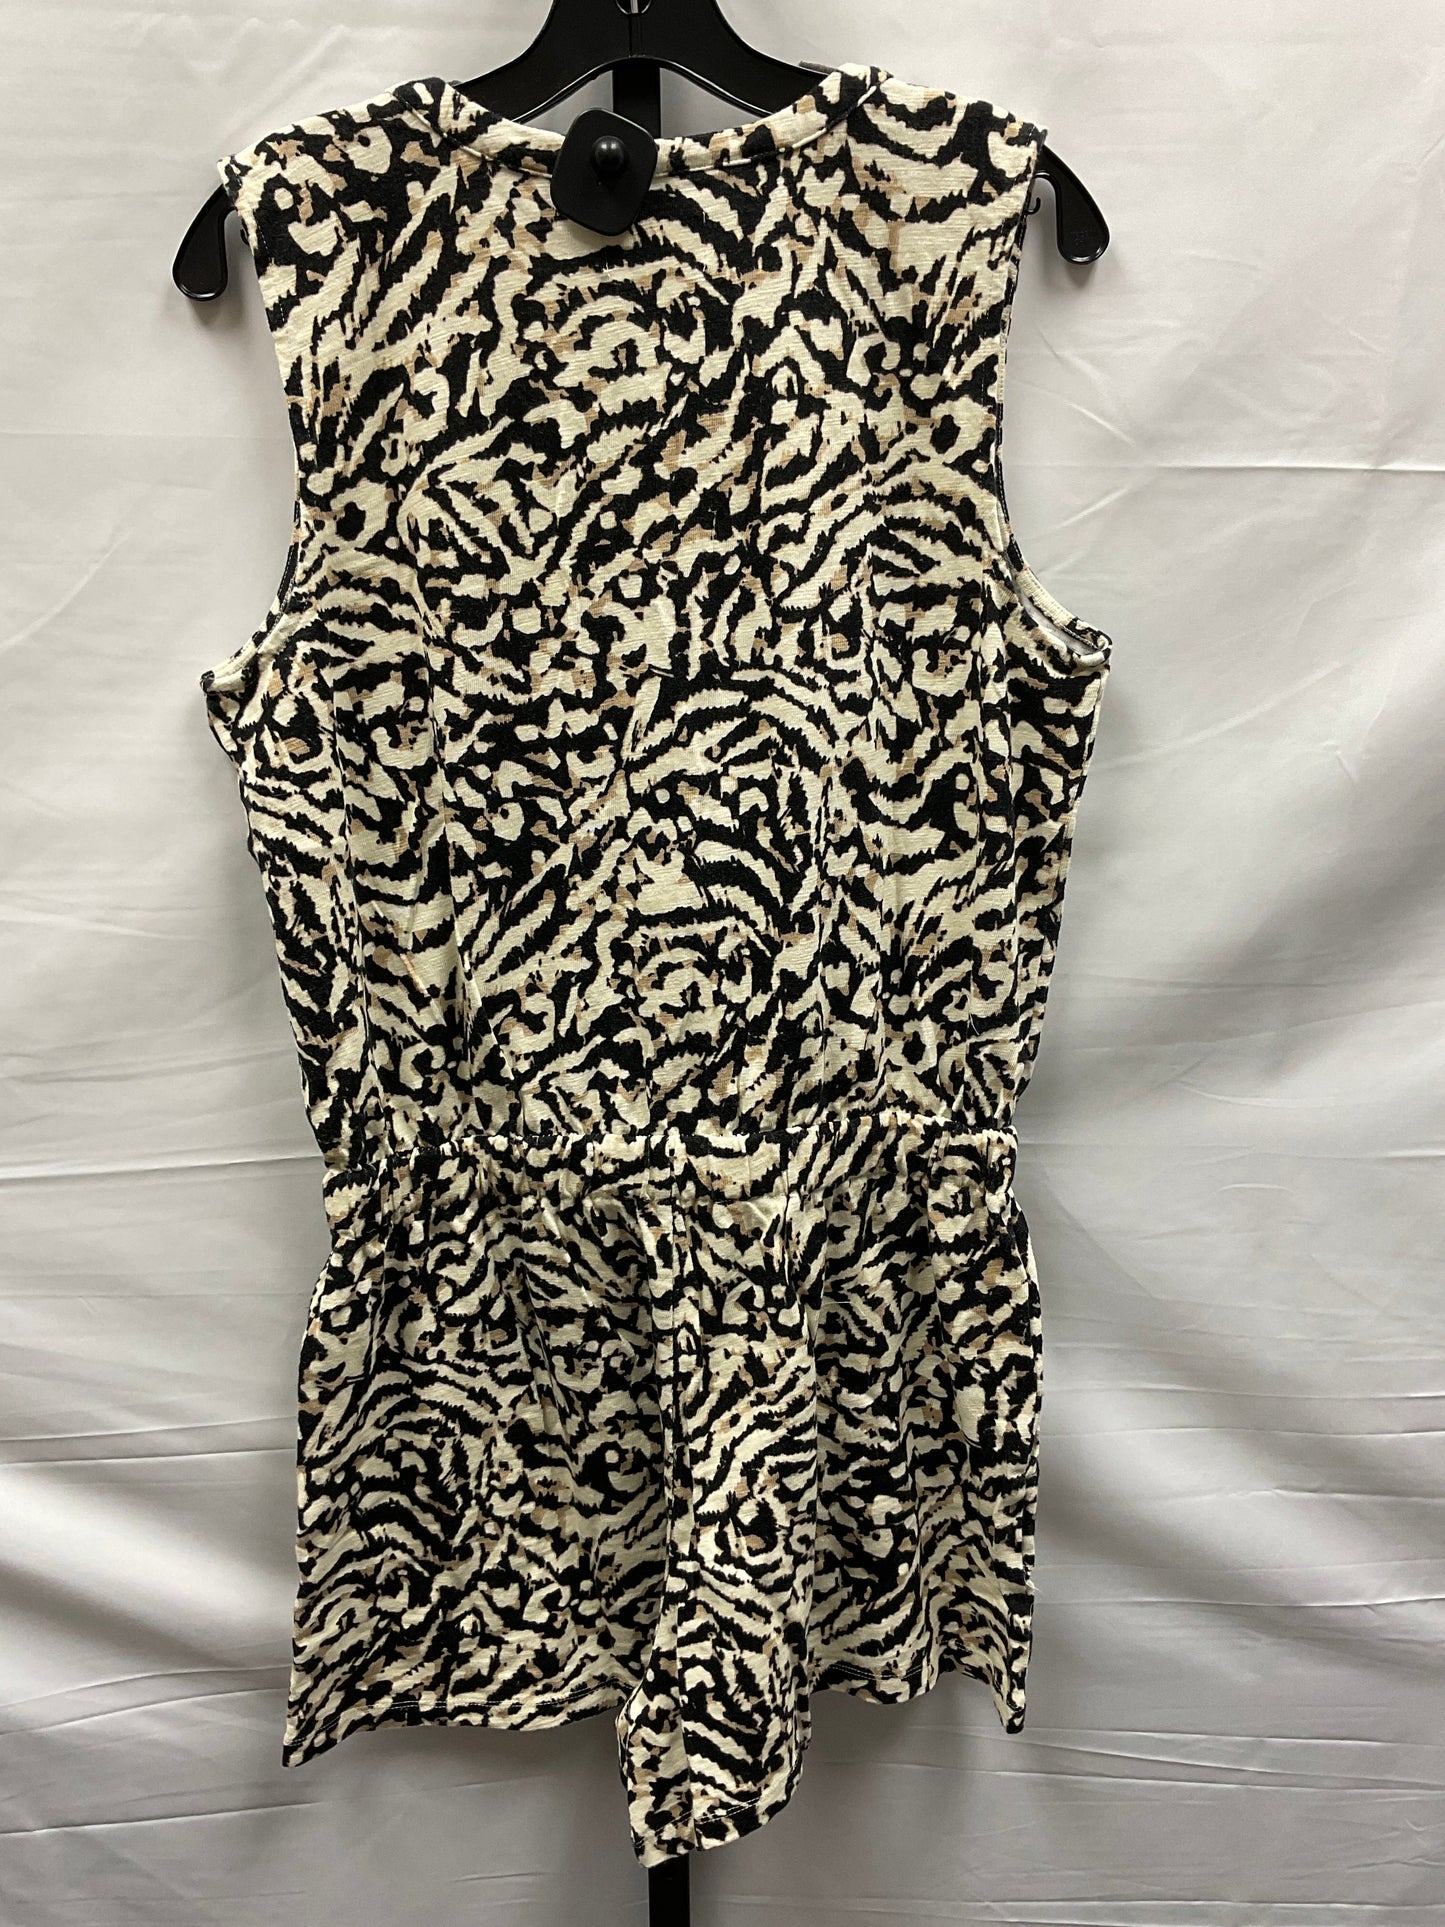 Animal Print Romper Lou And Grey, Size M